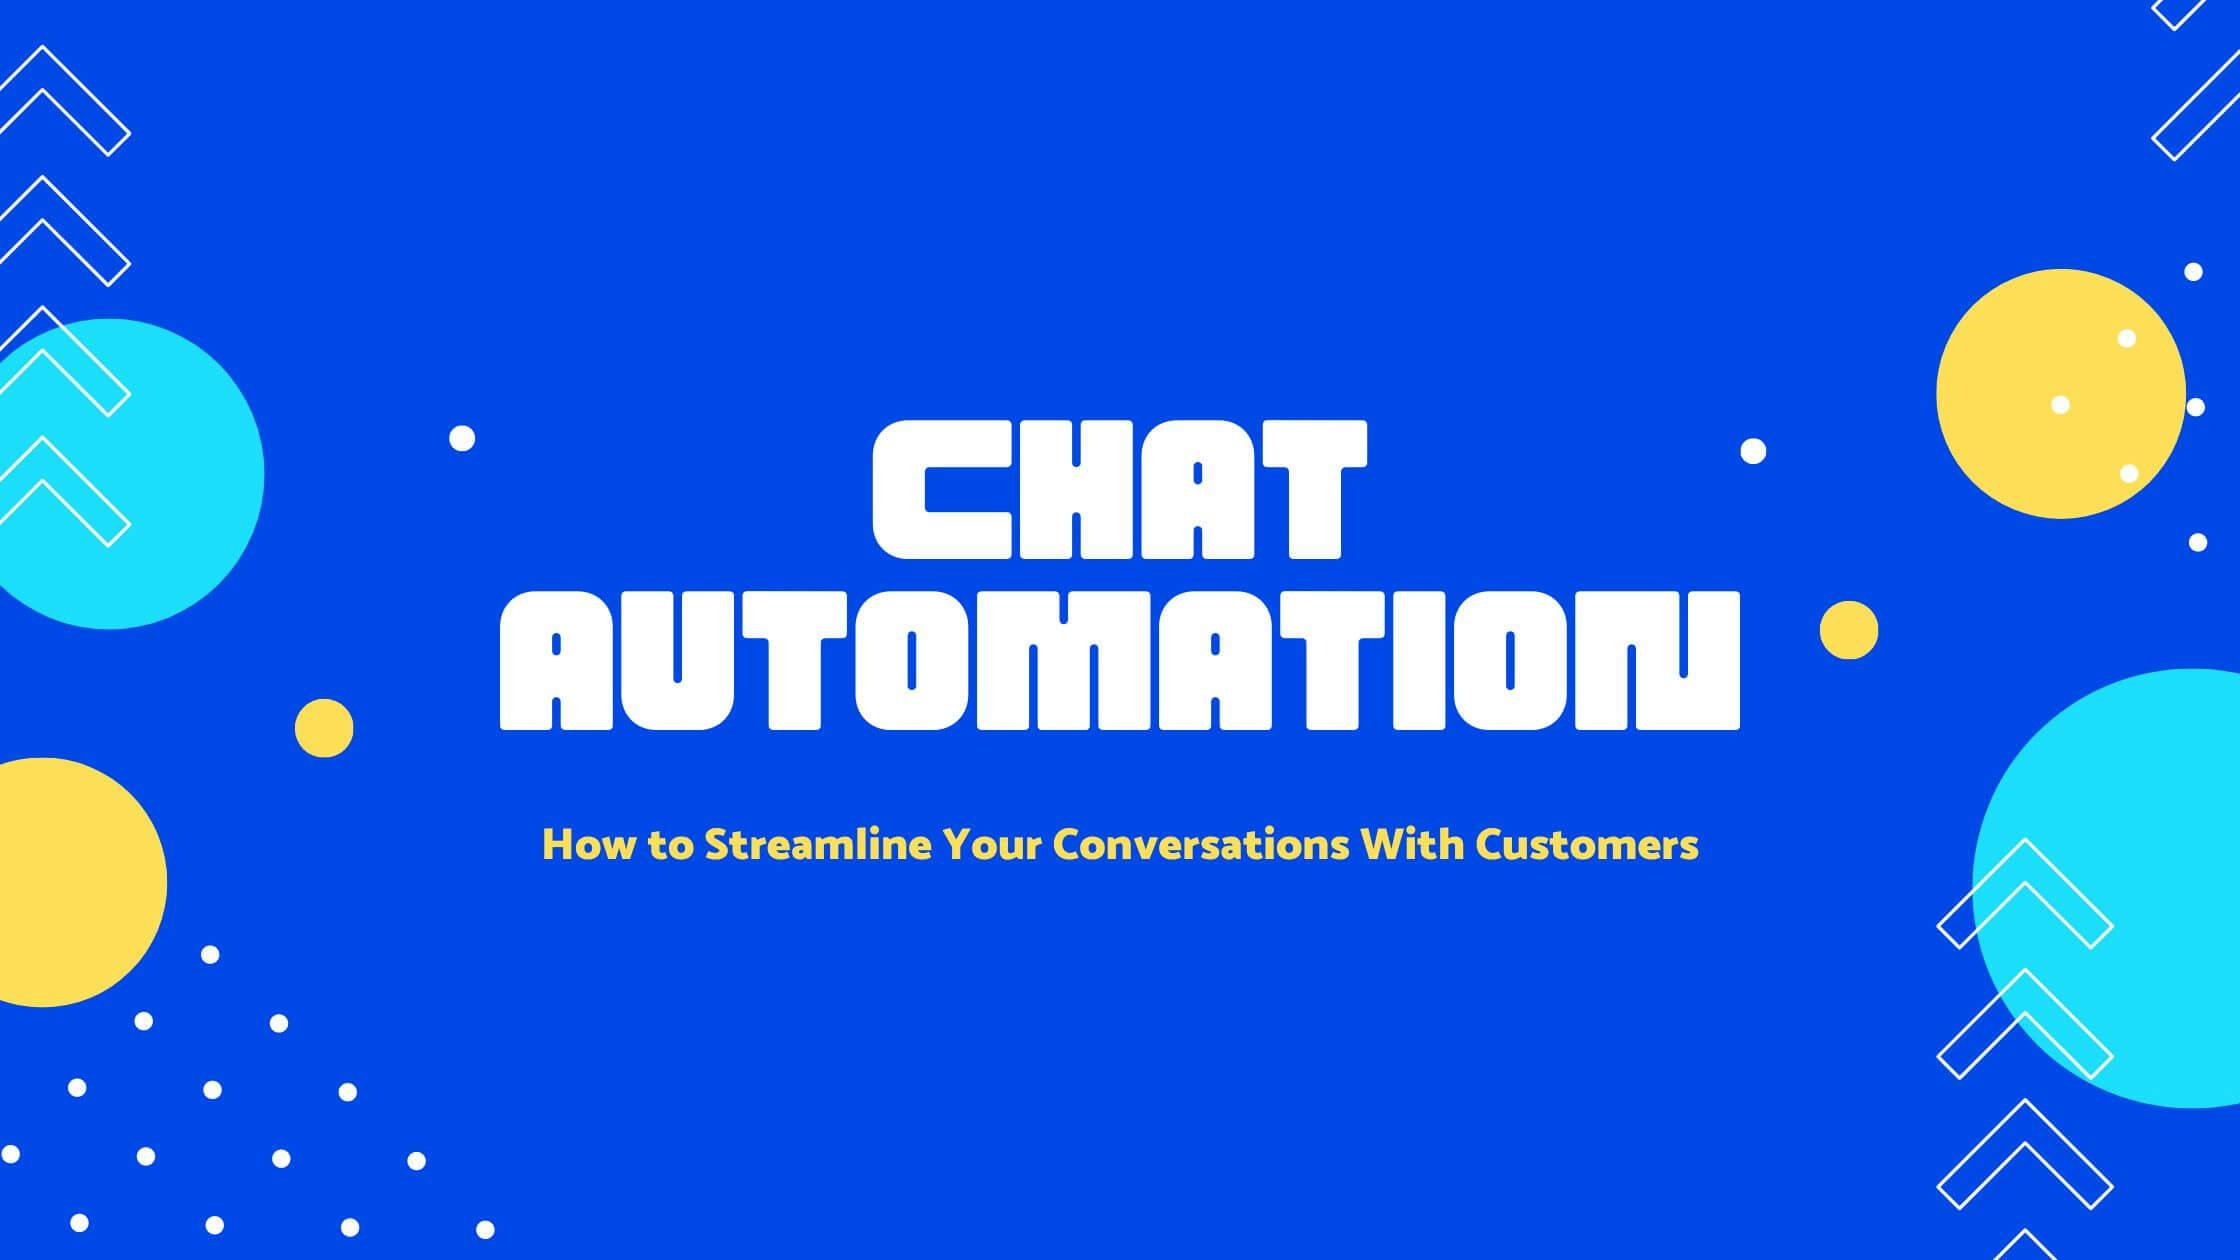 We Explored the 5 Best Tools for Chat Automation